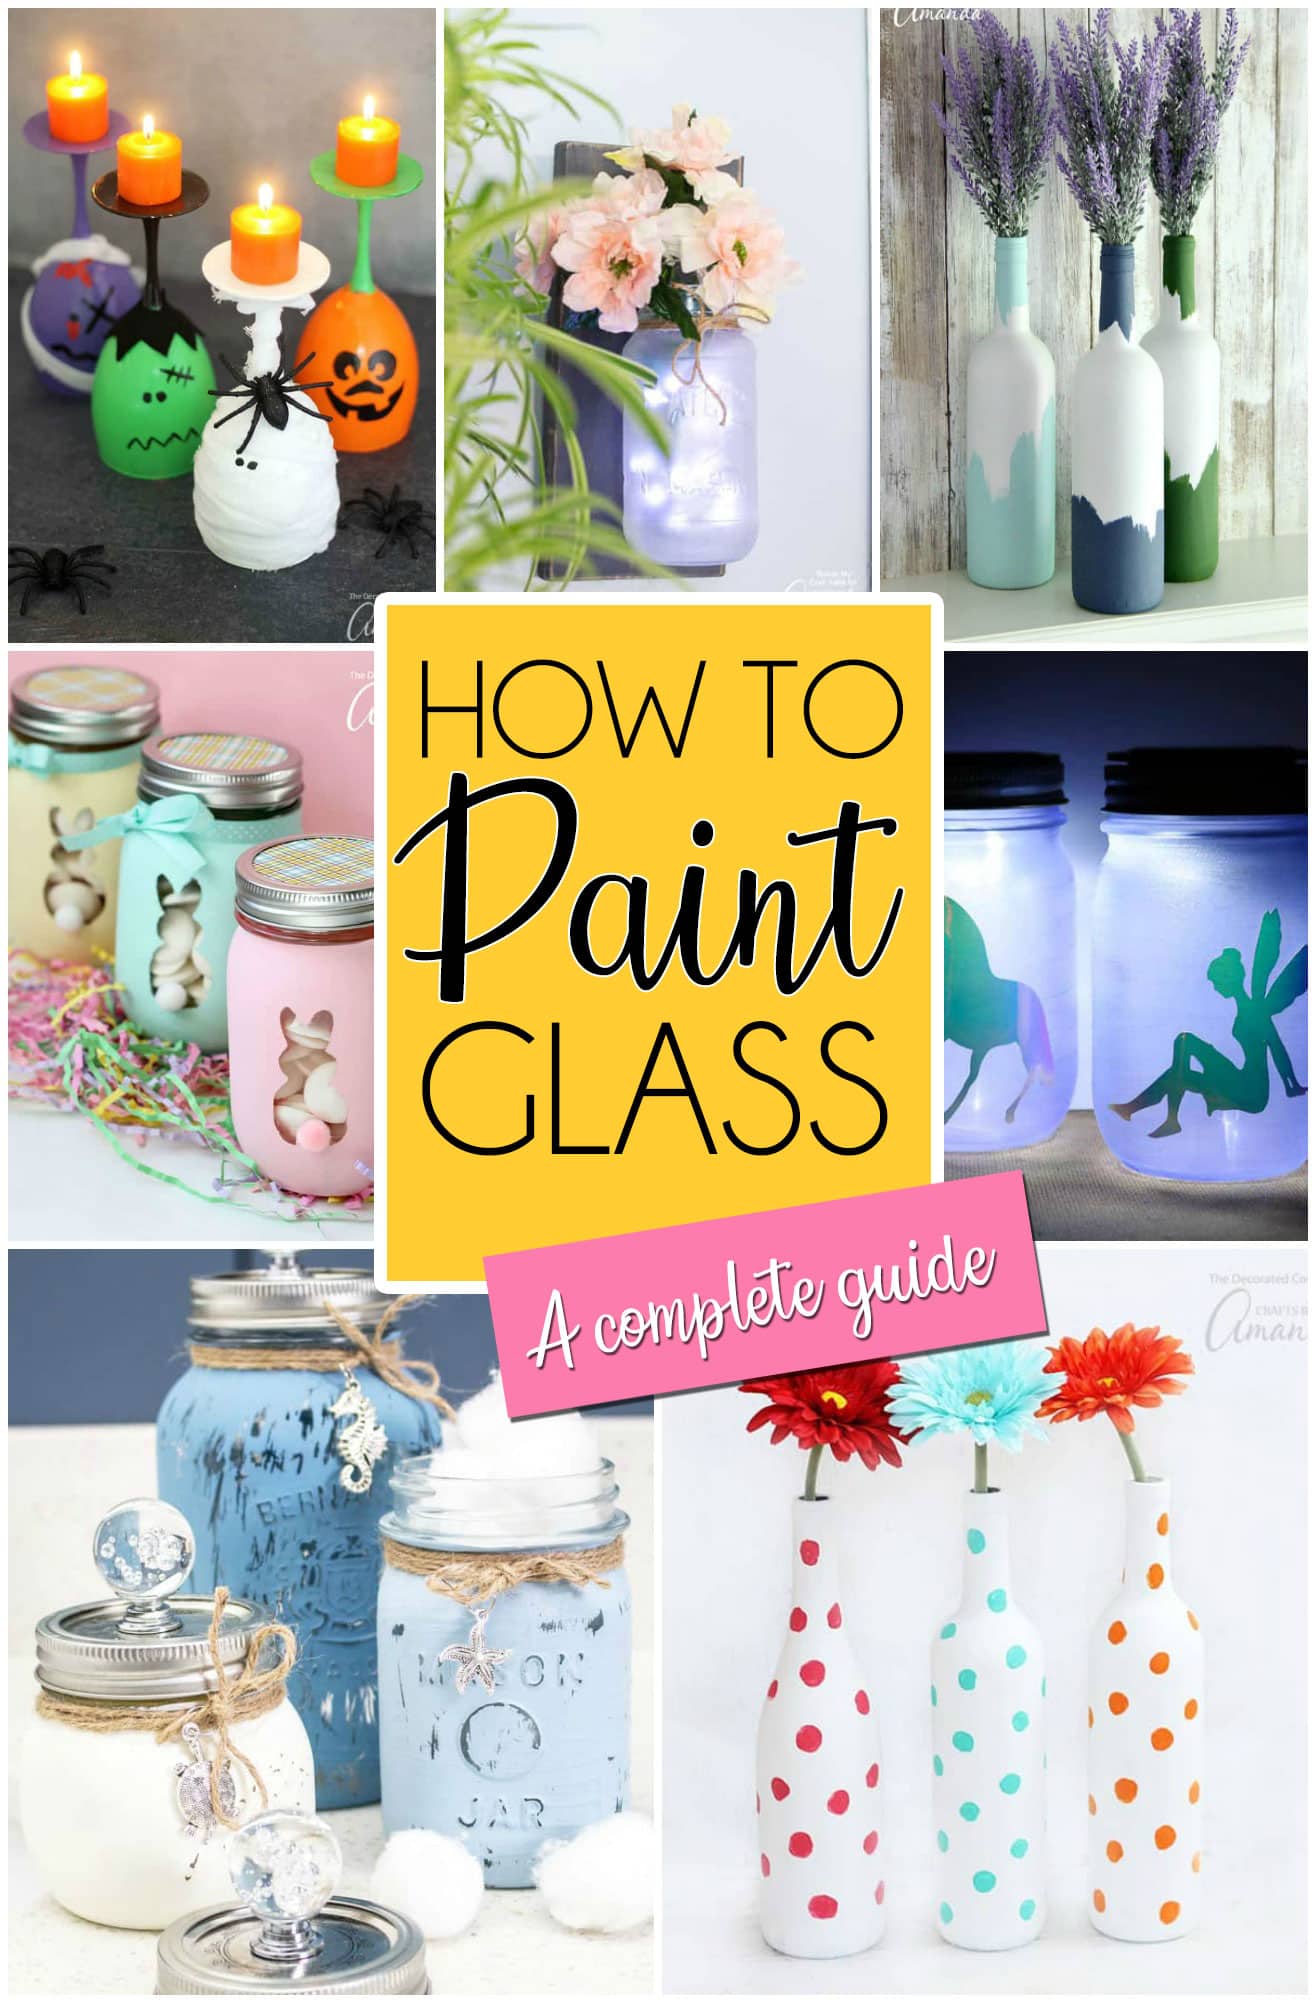 collage of glass painted projects